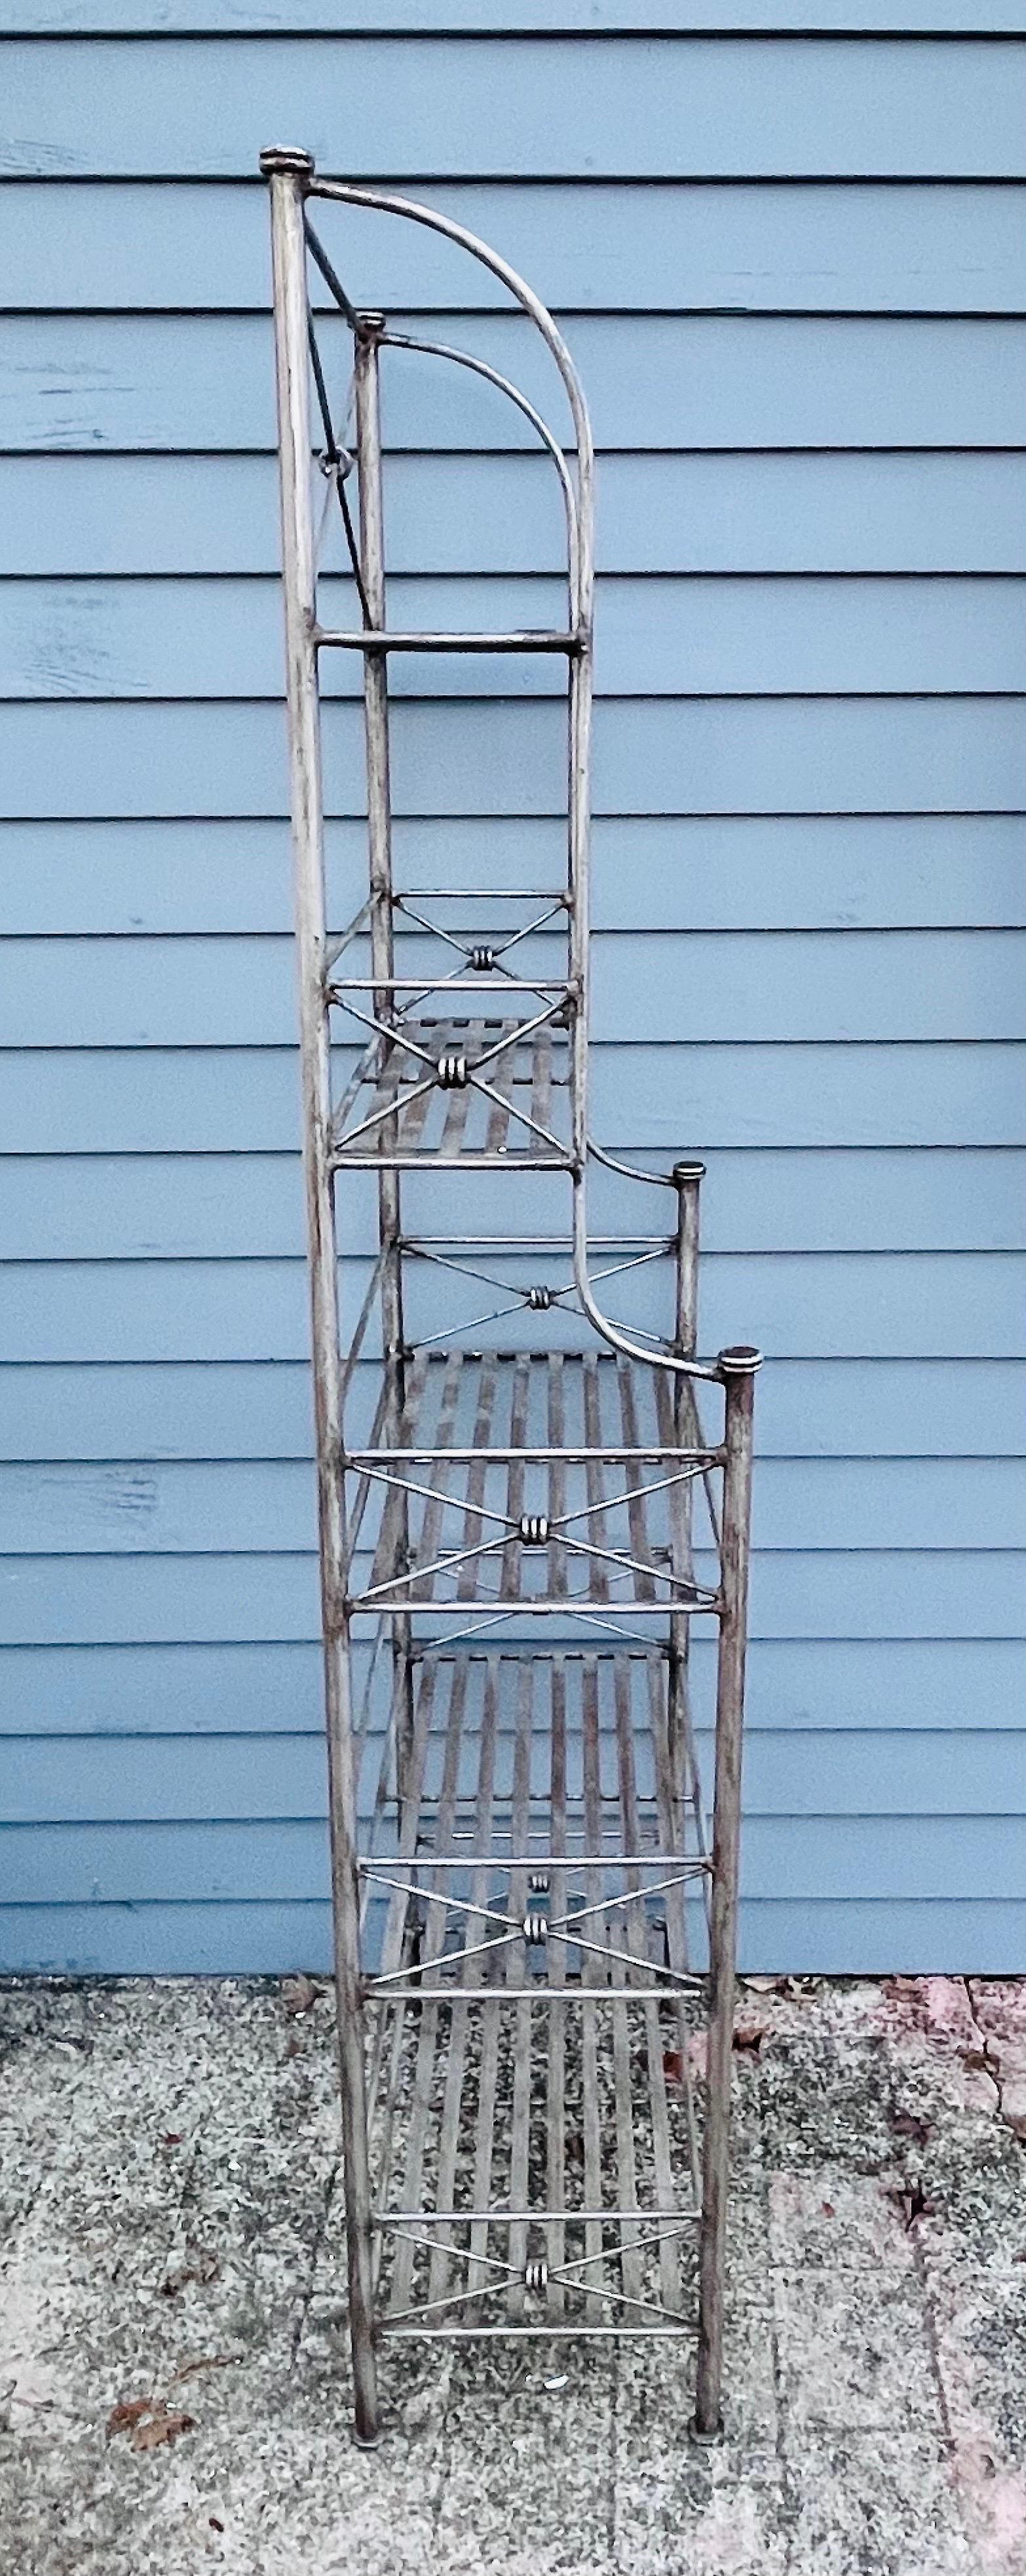 Giacometti inspired wrought iron Bakers Rack

Available now and ready to ship. 
This piece is in excellent condition and has spent its decades inside. Suitable for indoor/outdoor use.

Classic Diego Giacometti design featuring 5 shelves. A perfect